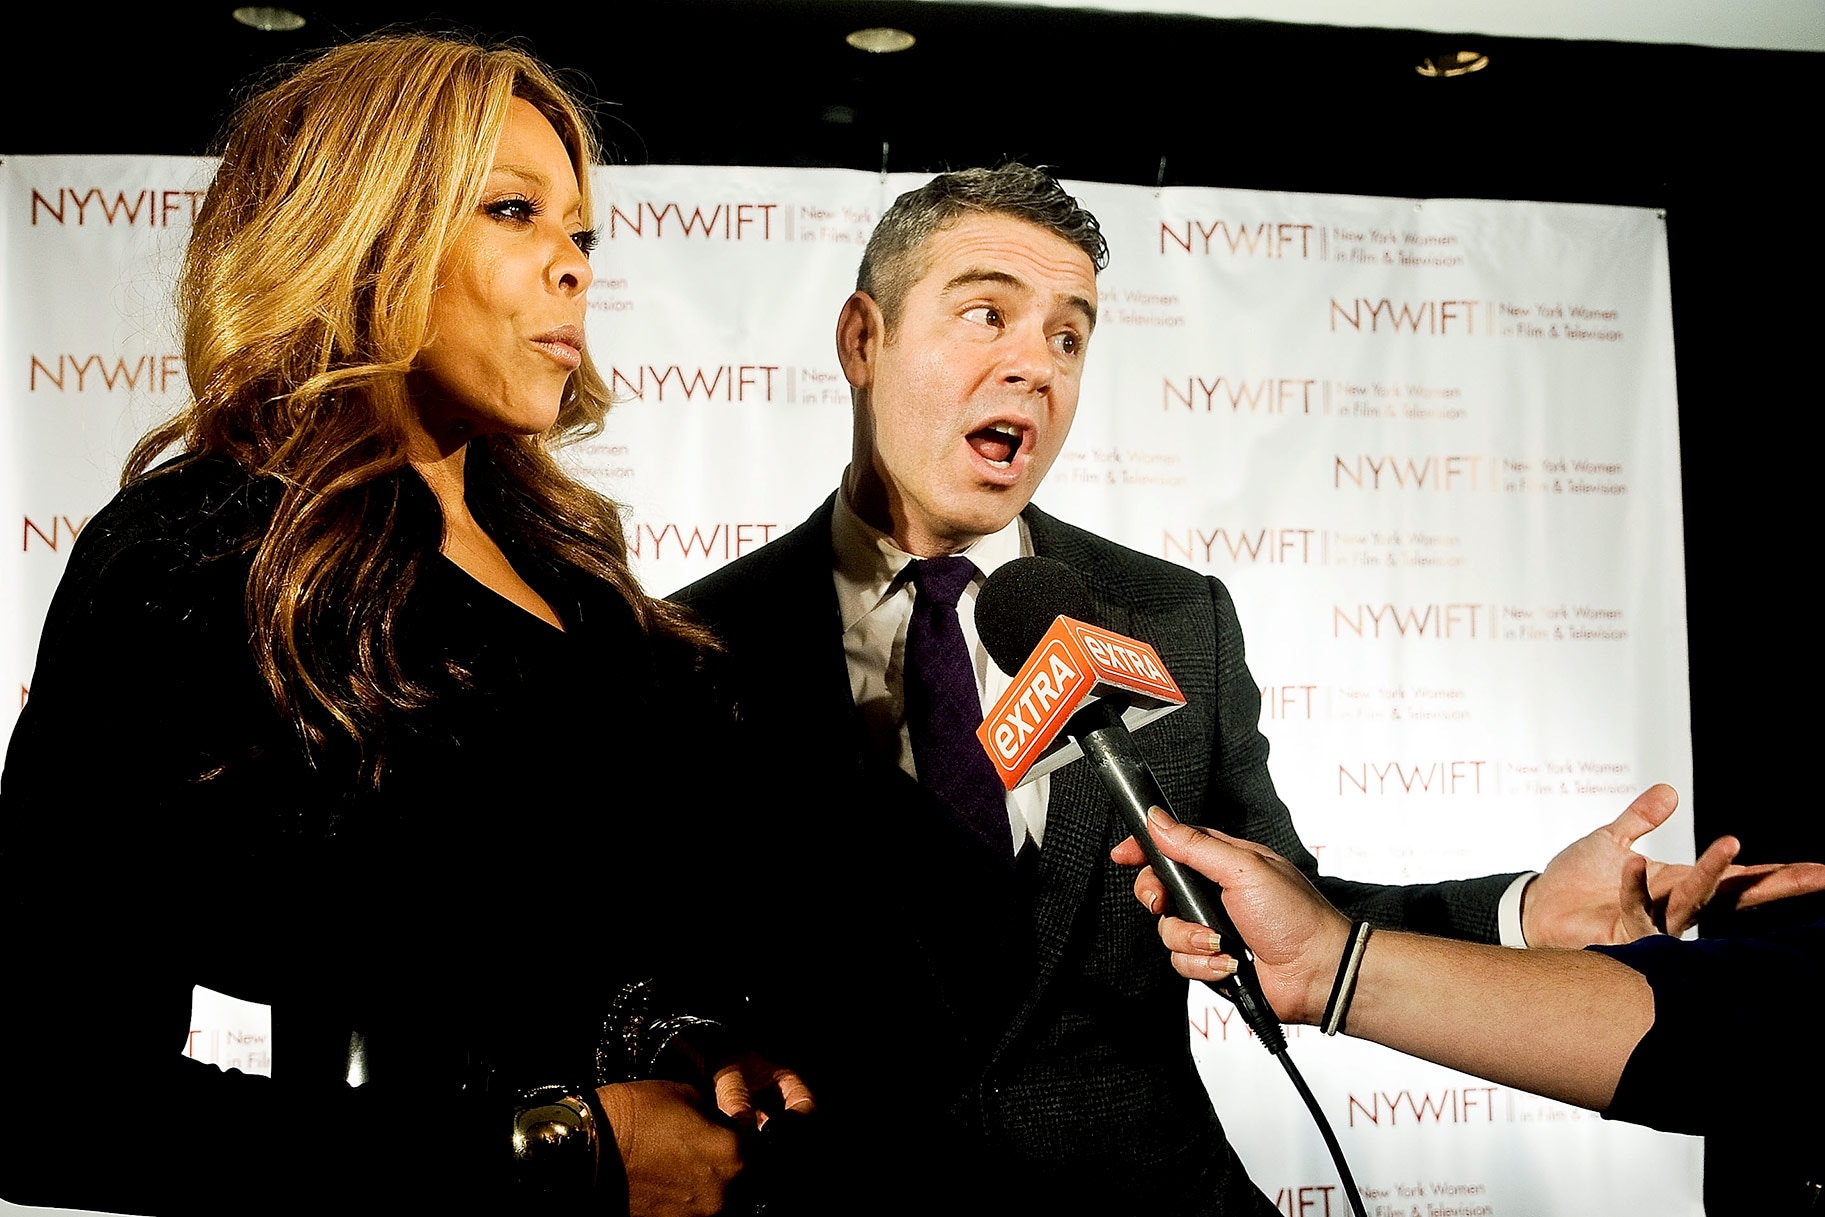 Andy Cohen and Wendy Williams